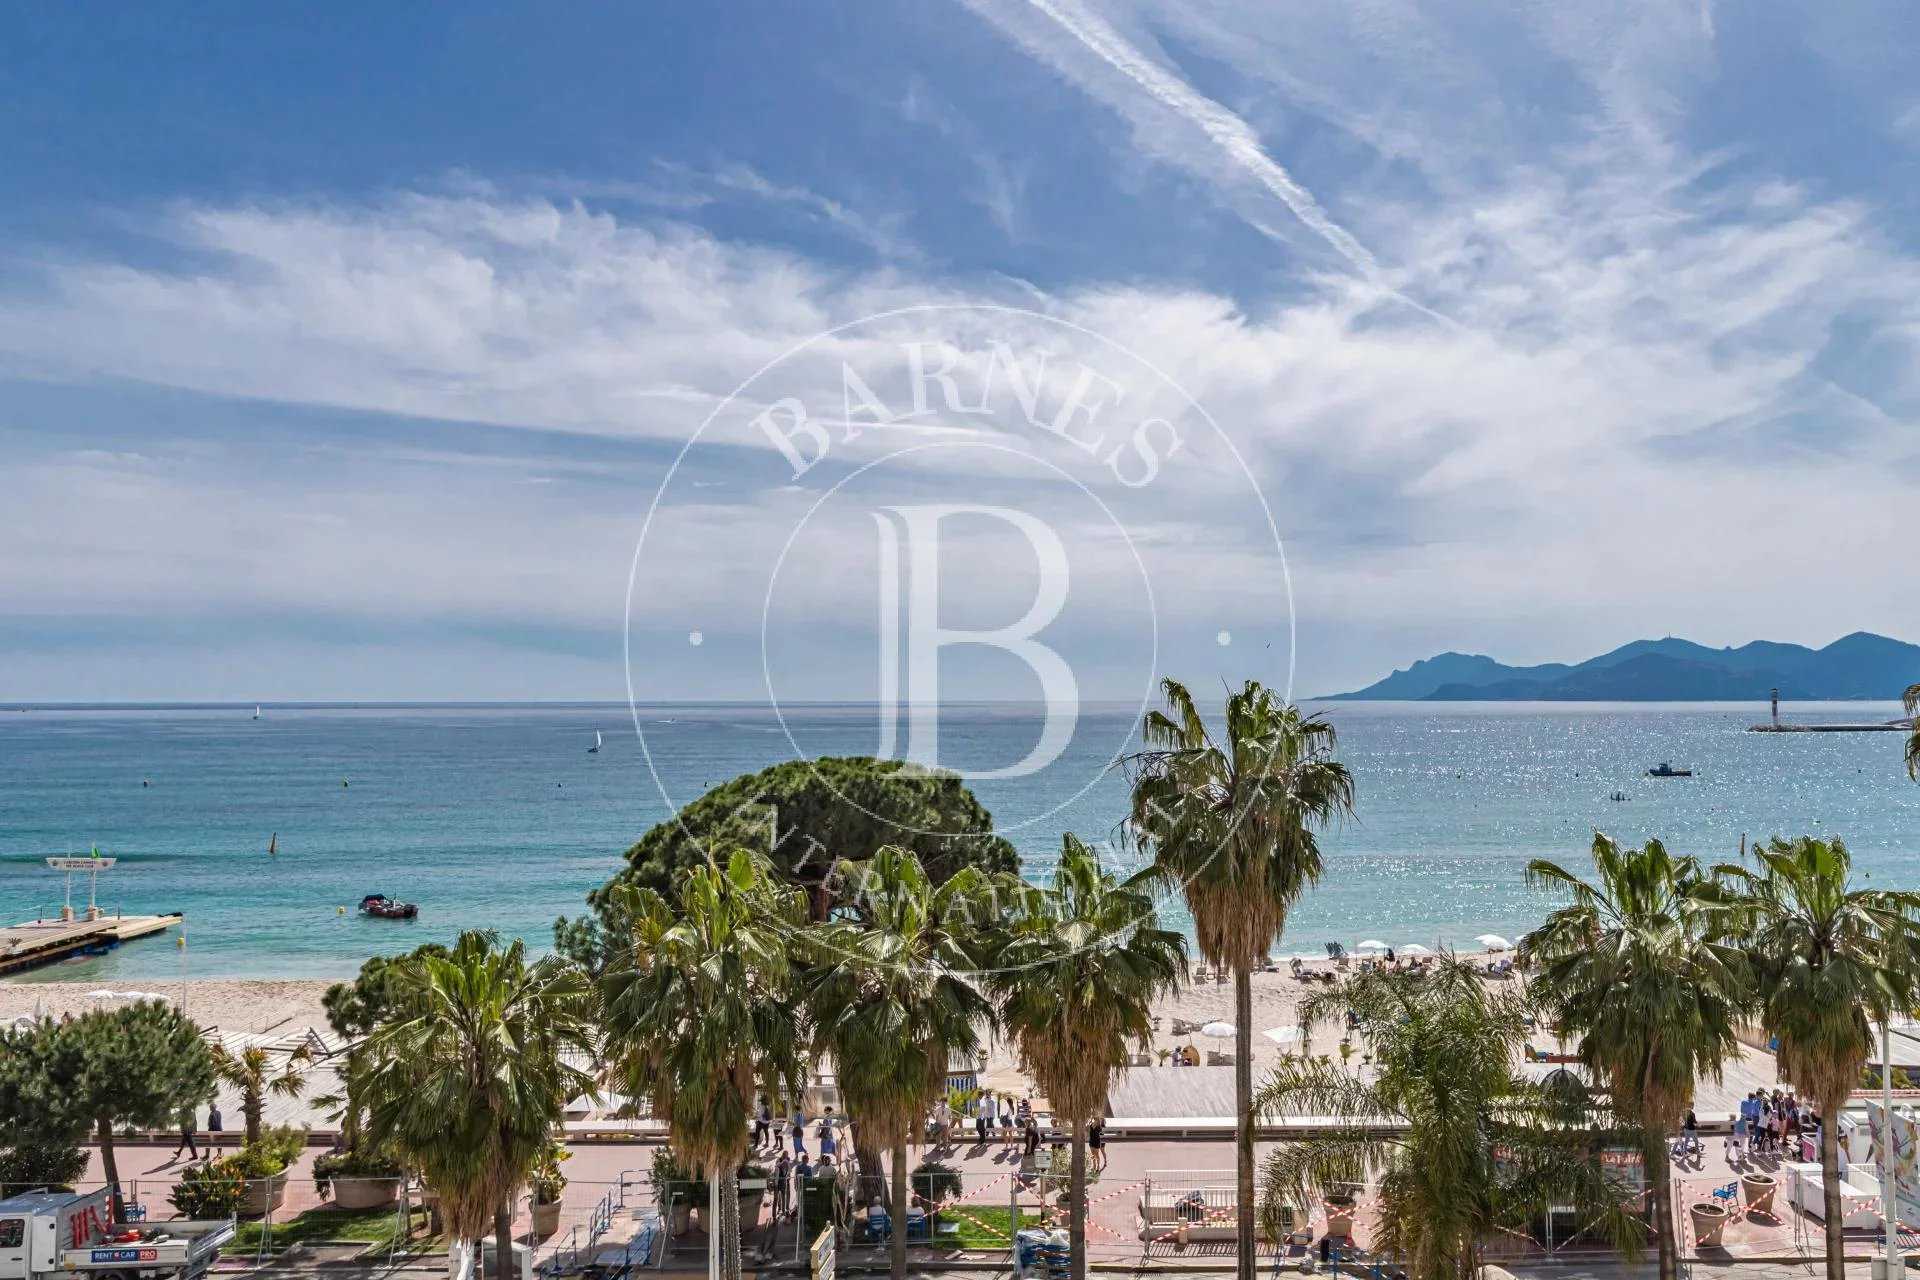 Cannes  - Appartement  2 Chambres